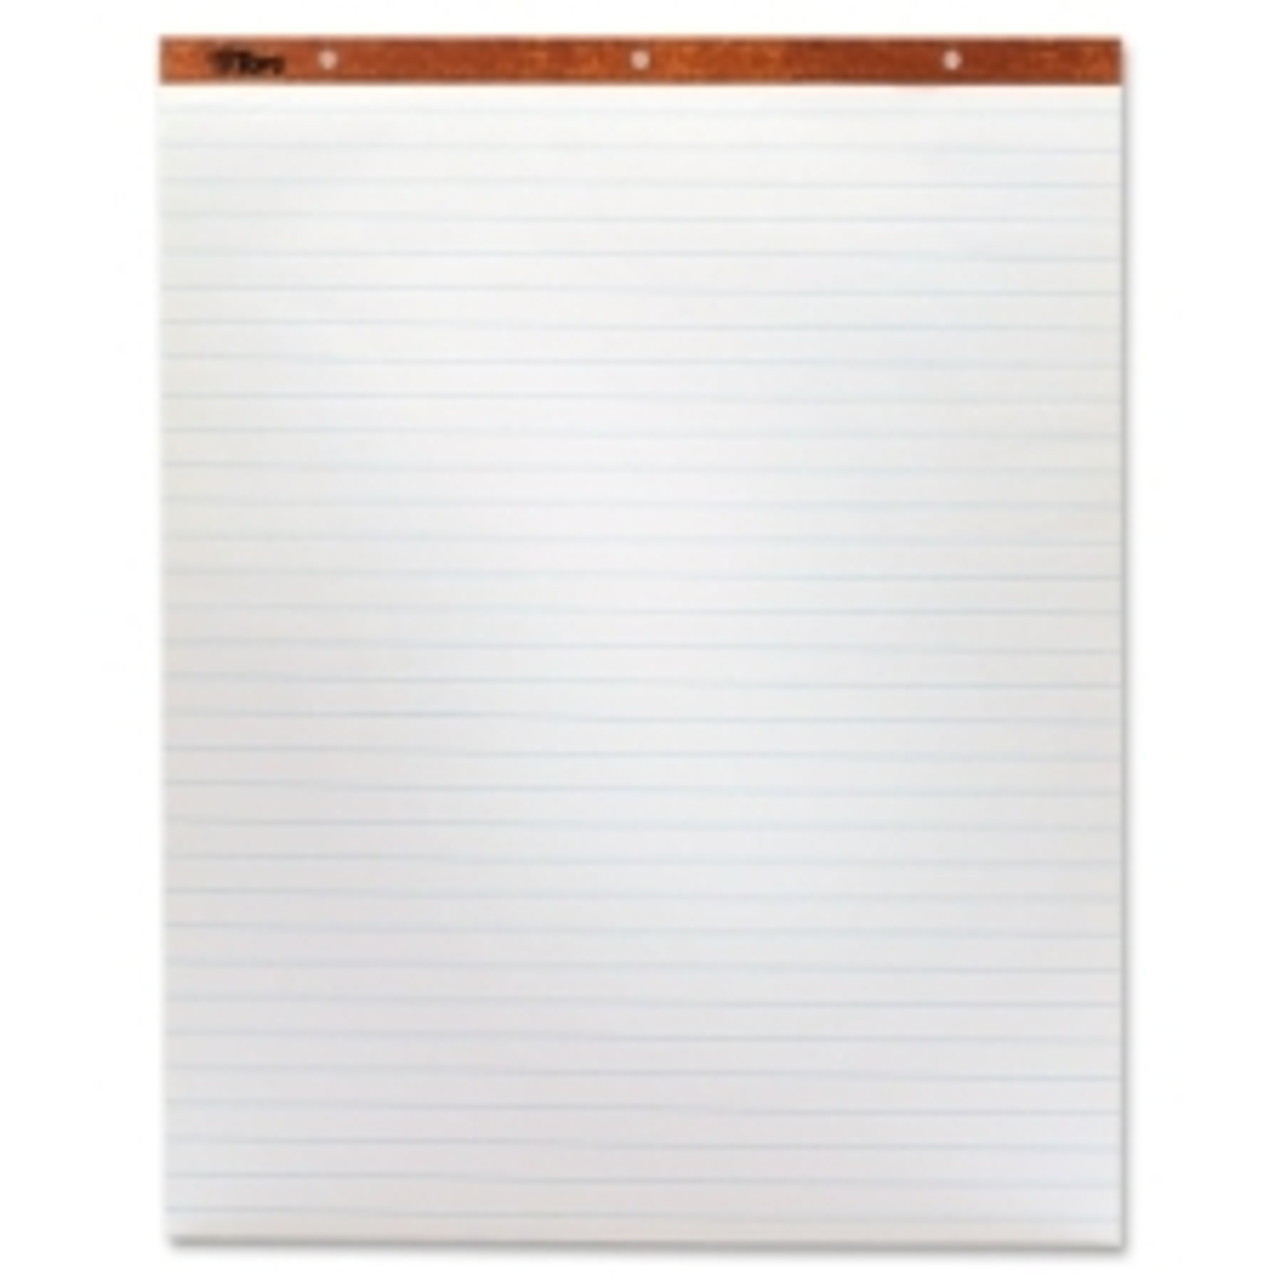 Bargin Prices on TOPS Horizontal Ruled Easel Pads Discount Office Supplies